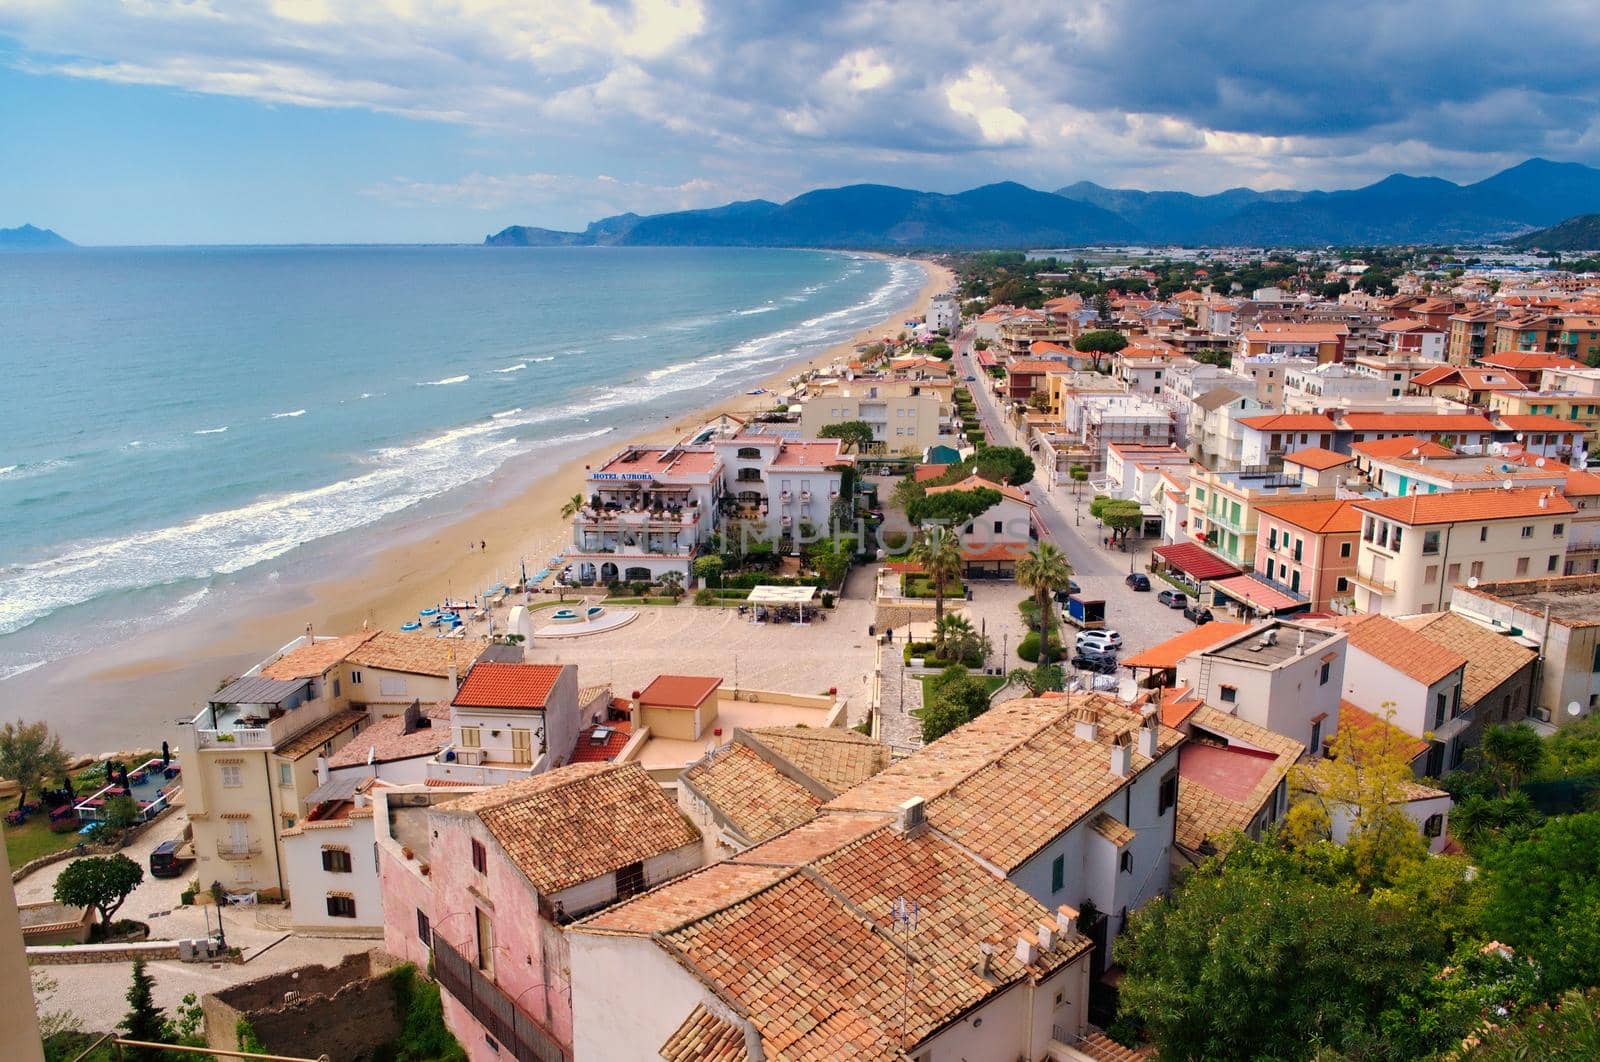 Town of Terracina, Italy. Elevated view of the beach.